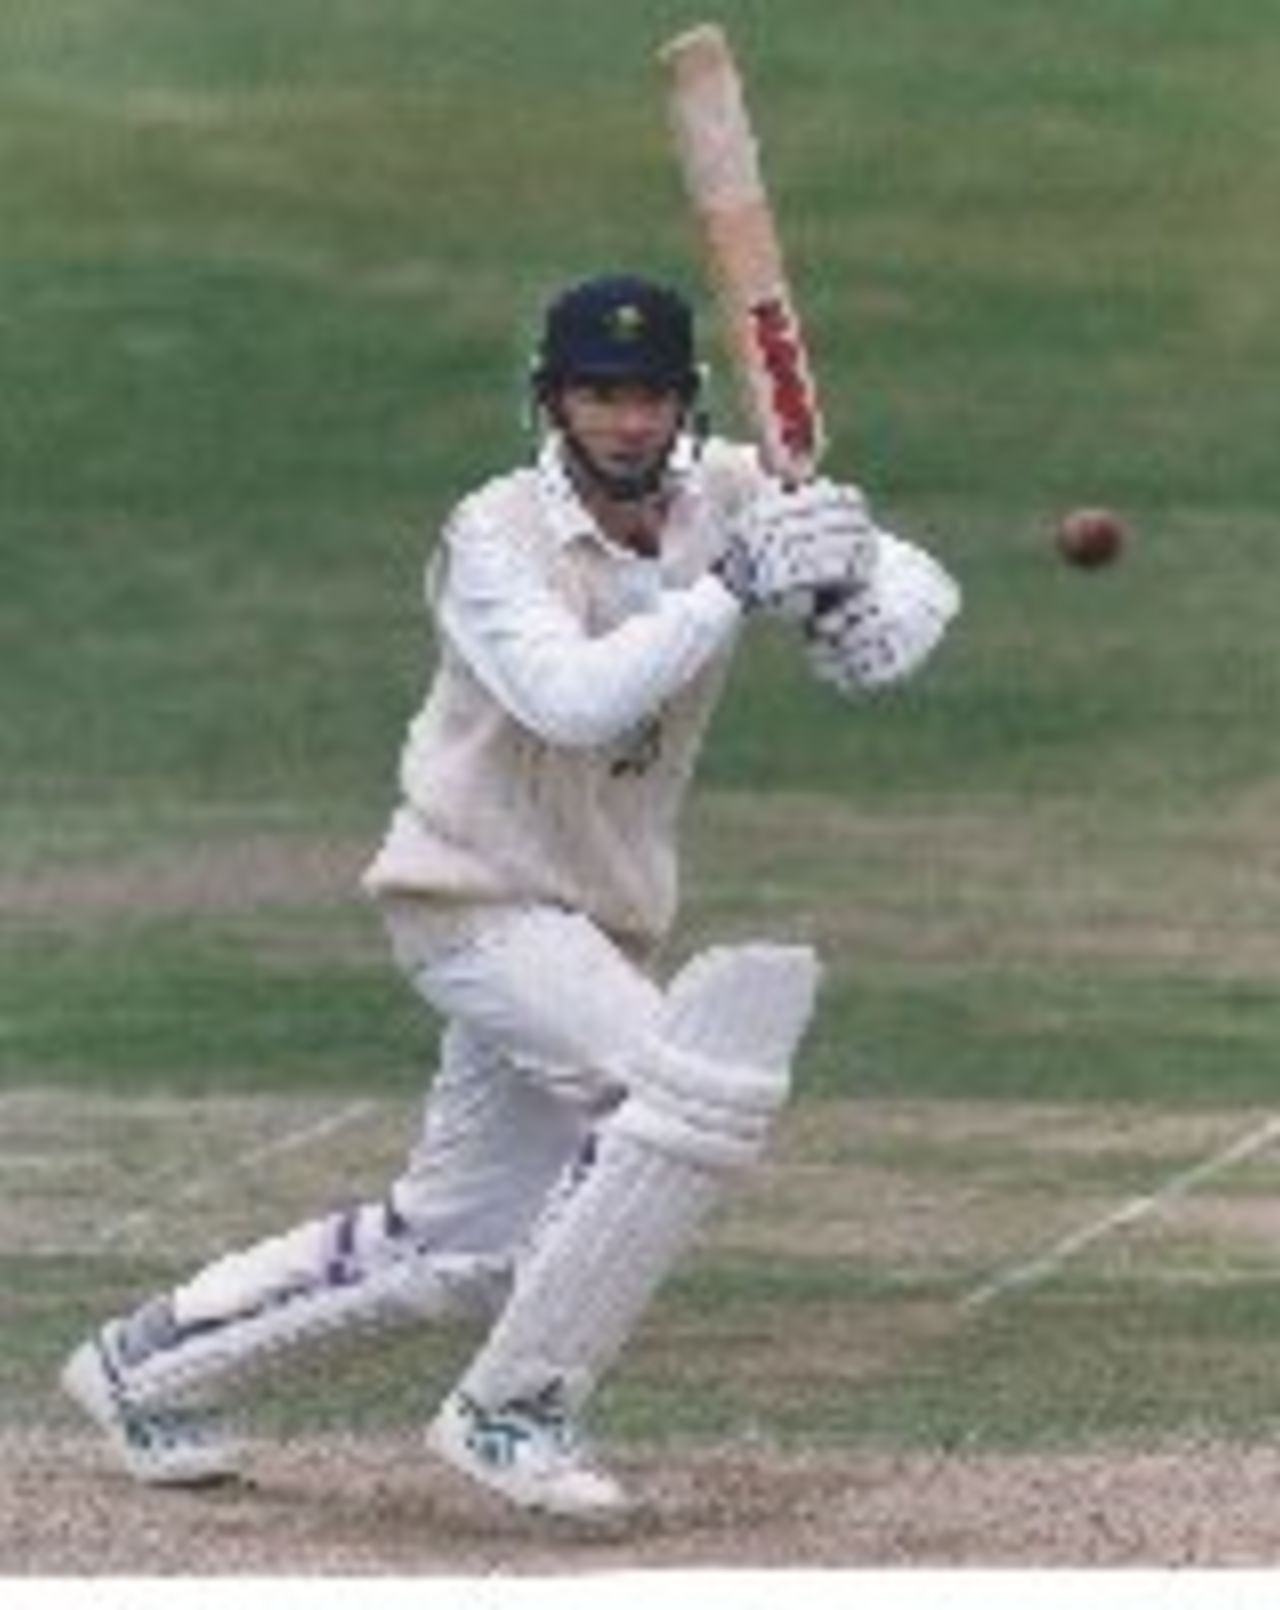 Steve James cover drives during the Championship match with Middlesex at Colwyn Bay in June 1995